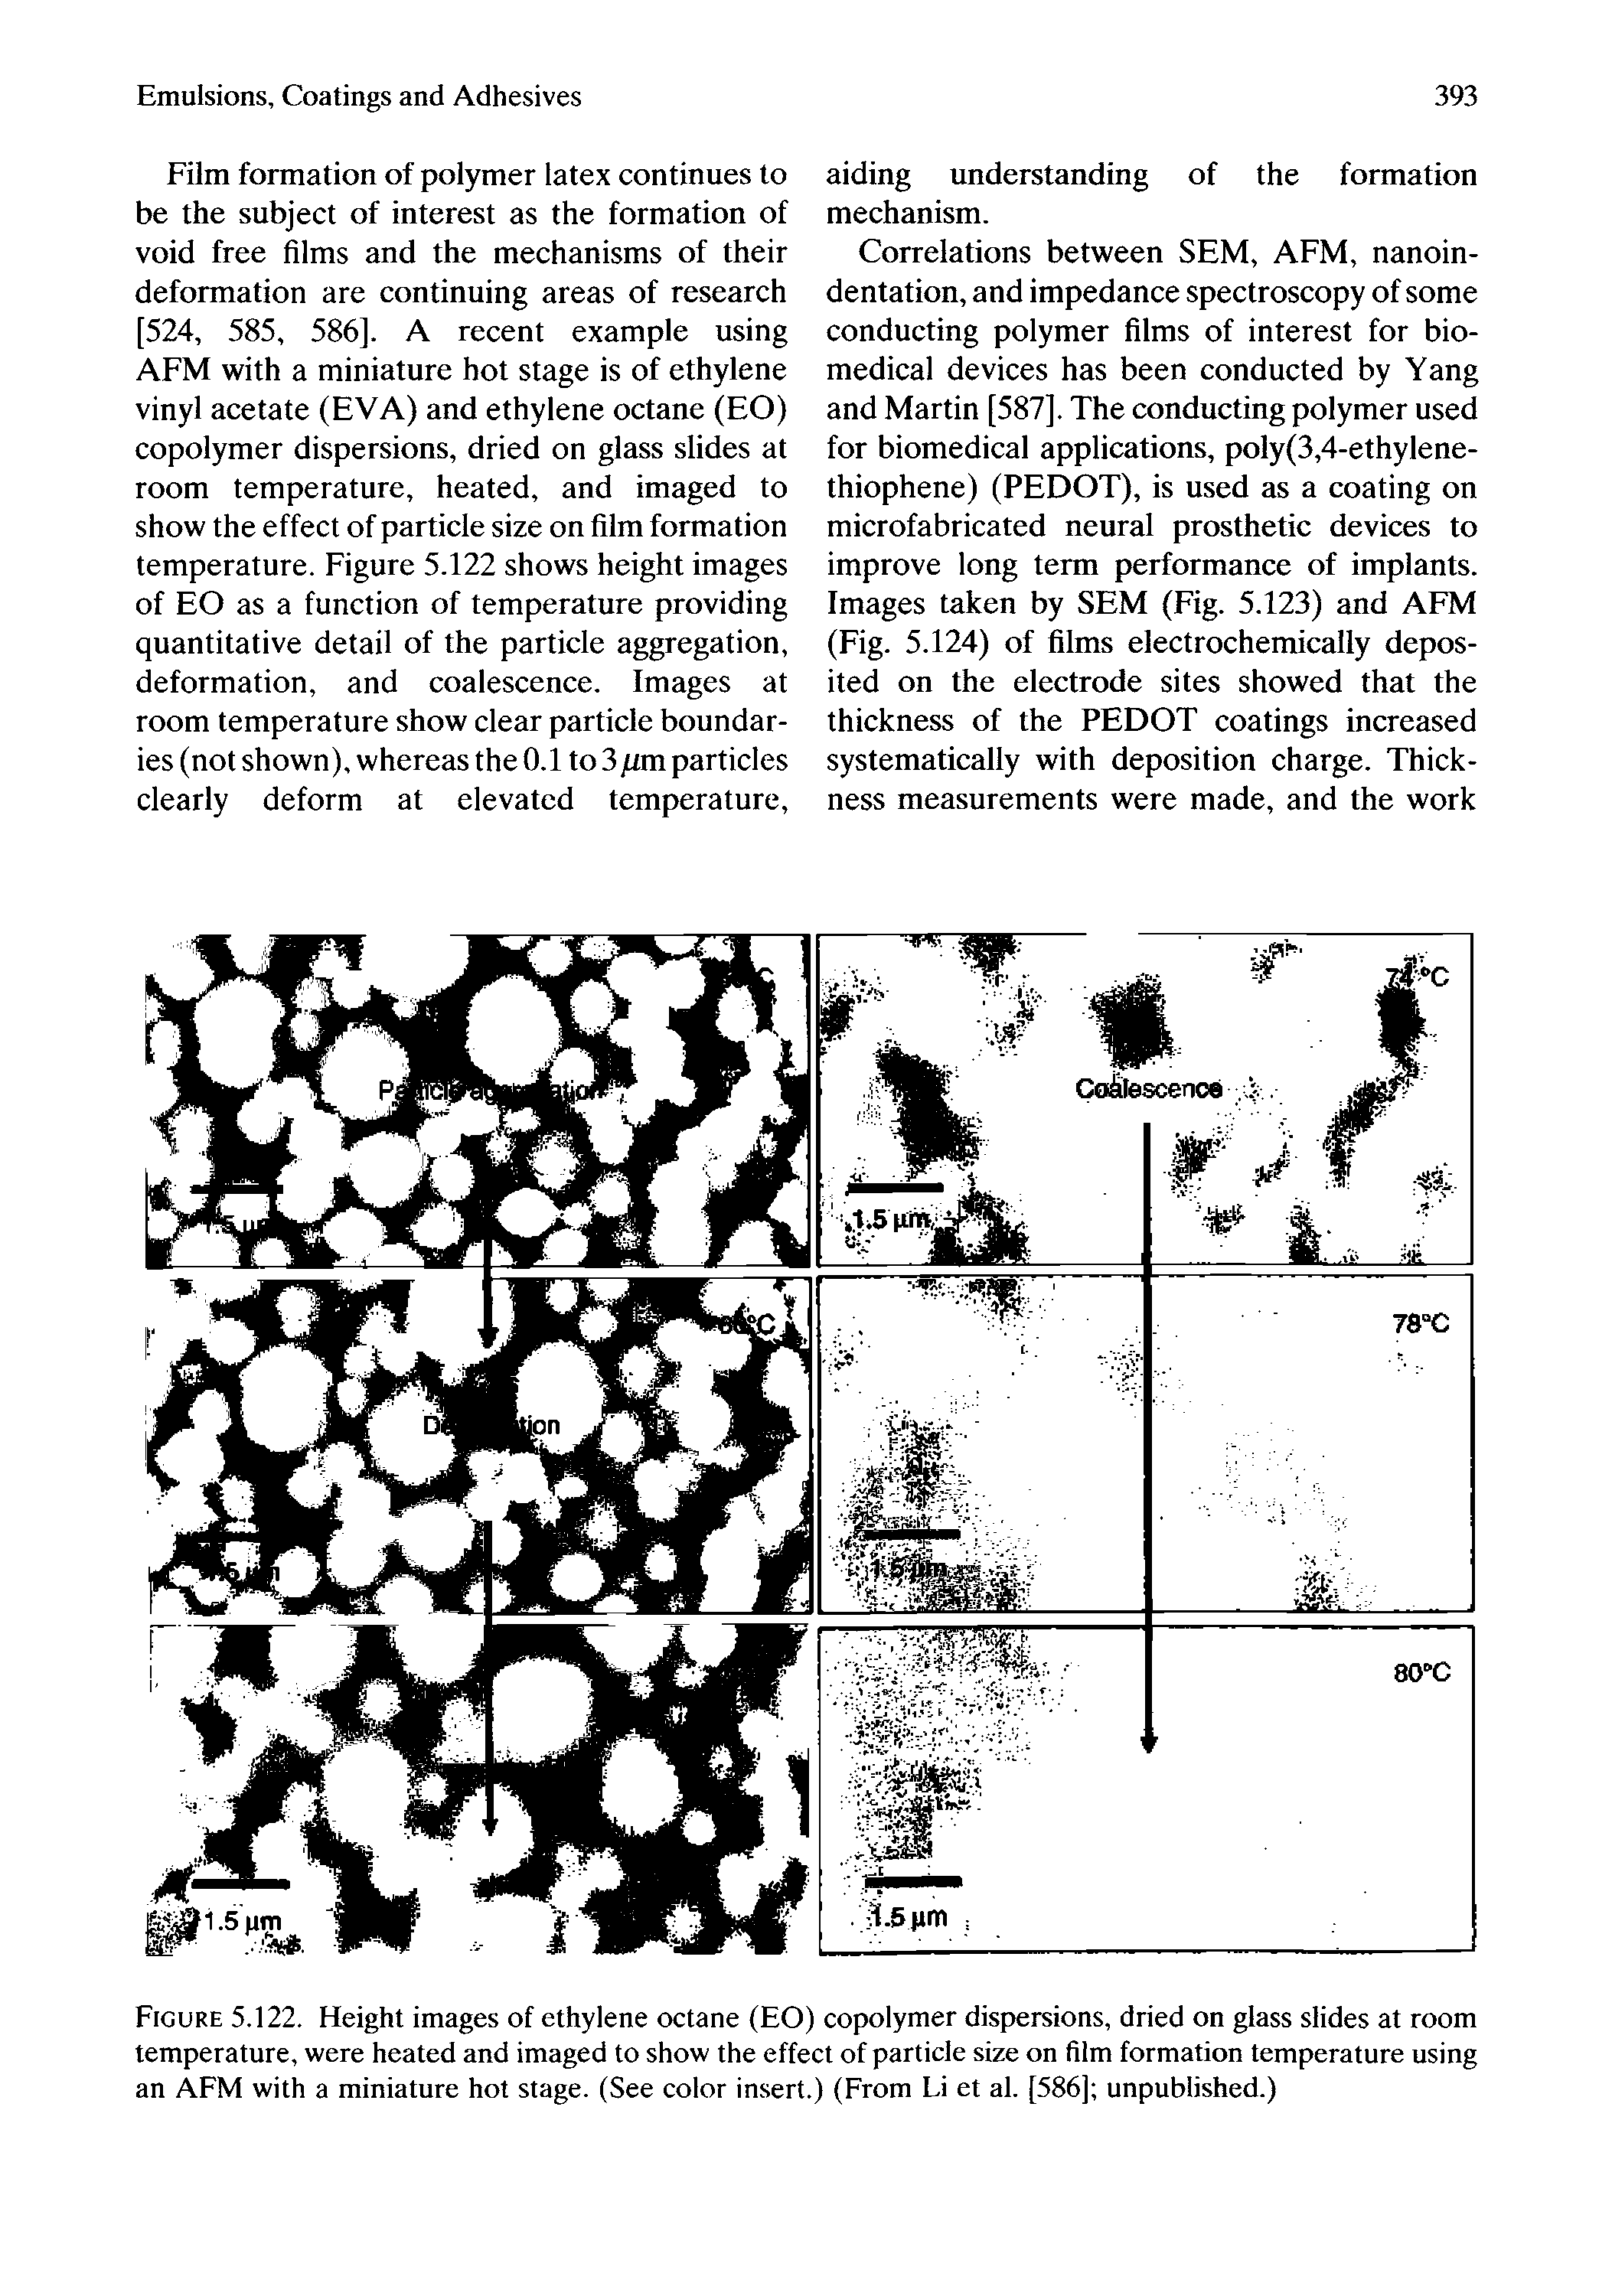 Figure 5.122. Height images of ethylene octane (EO) copolymer dispersions, dried on glass slides at room temperature, were heated and imaged to show the effect of particle size on film formation temperature using an AFM with a miniature hot stage. (See color insert.) (From Li et al. [586] unpublished.)...